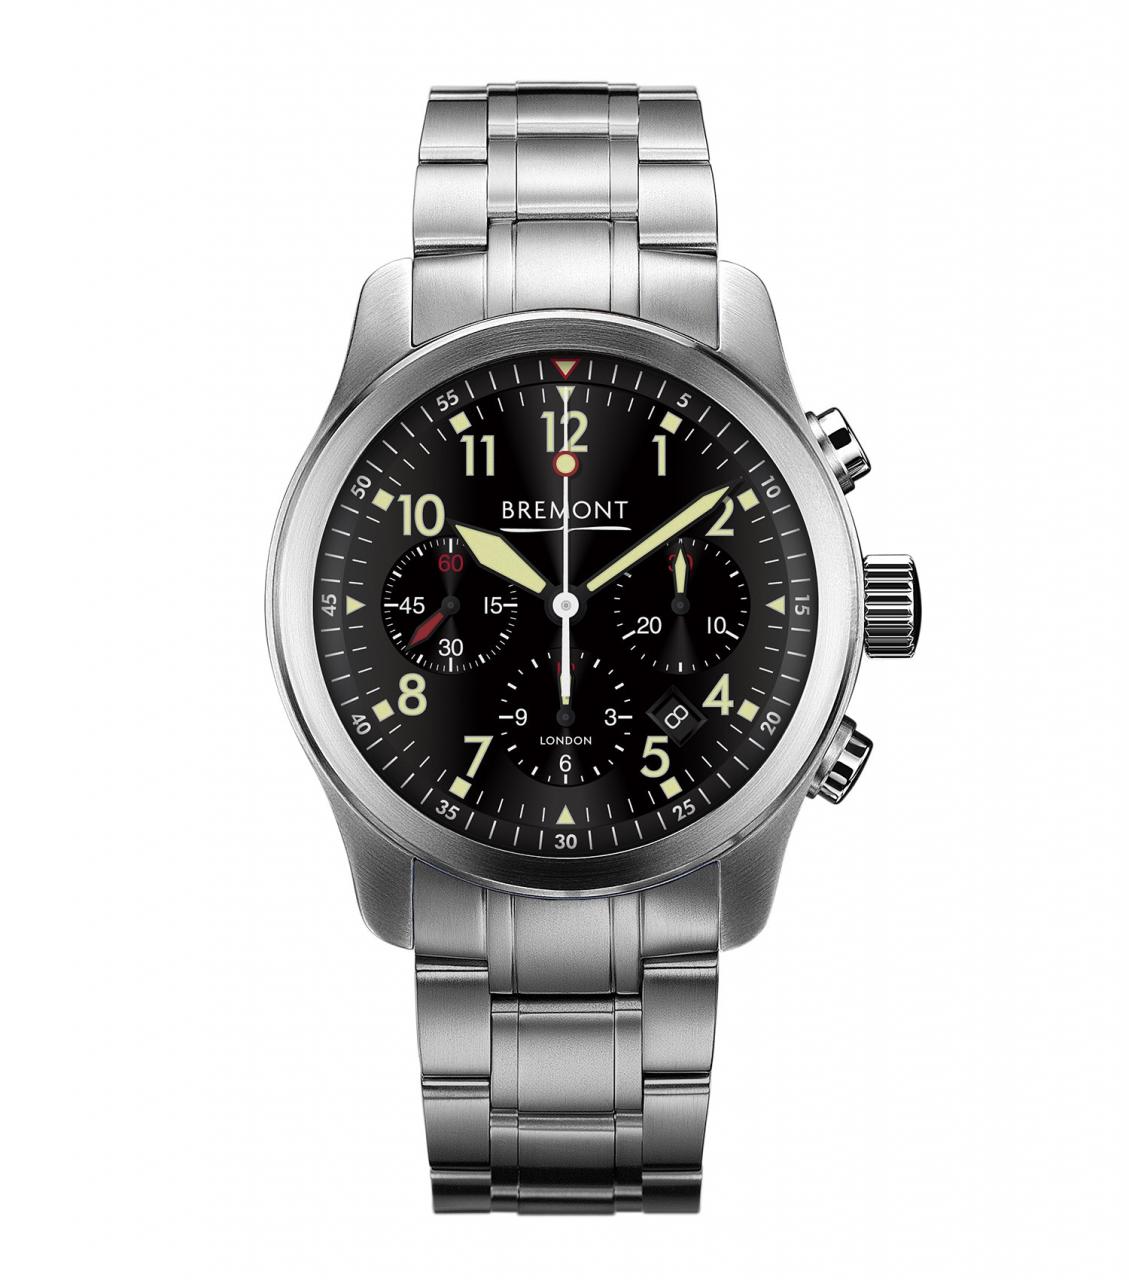 High End Introducing Three New Bremont ALT1-P Chronographs, With ...